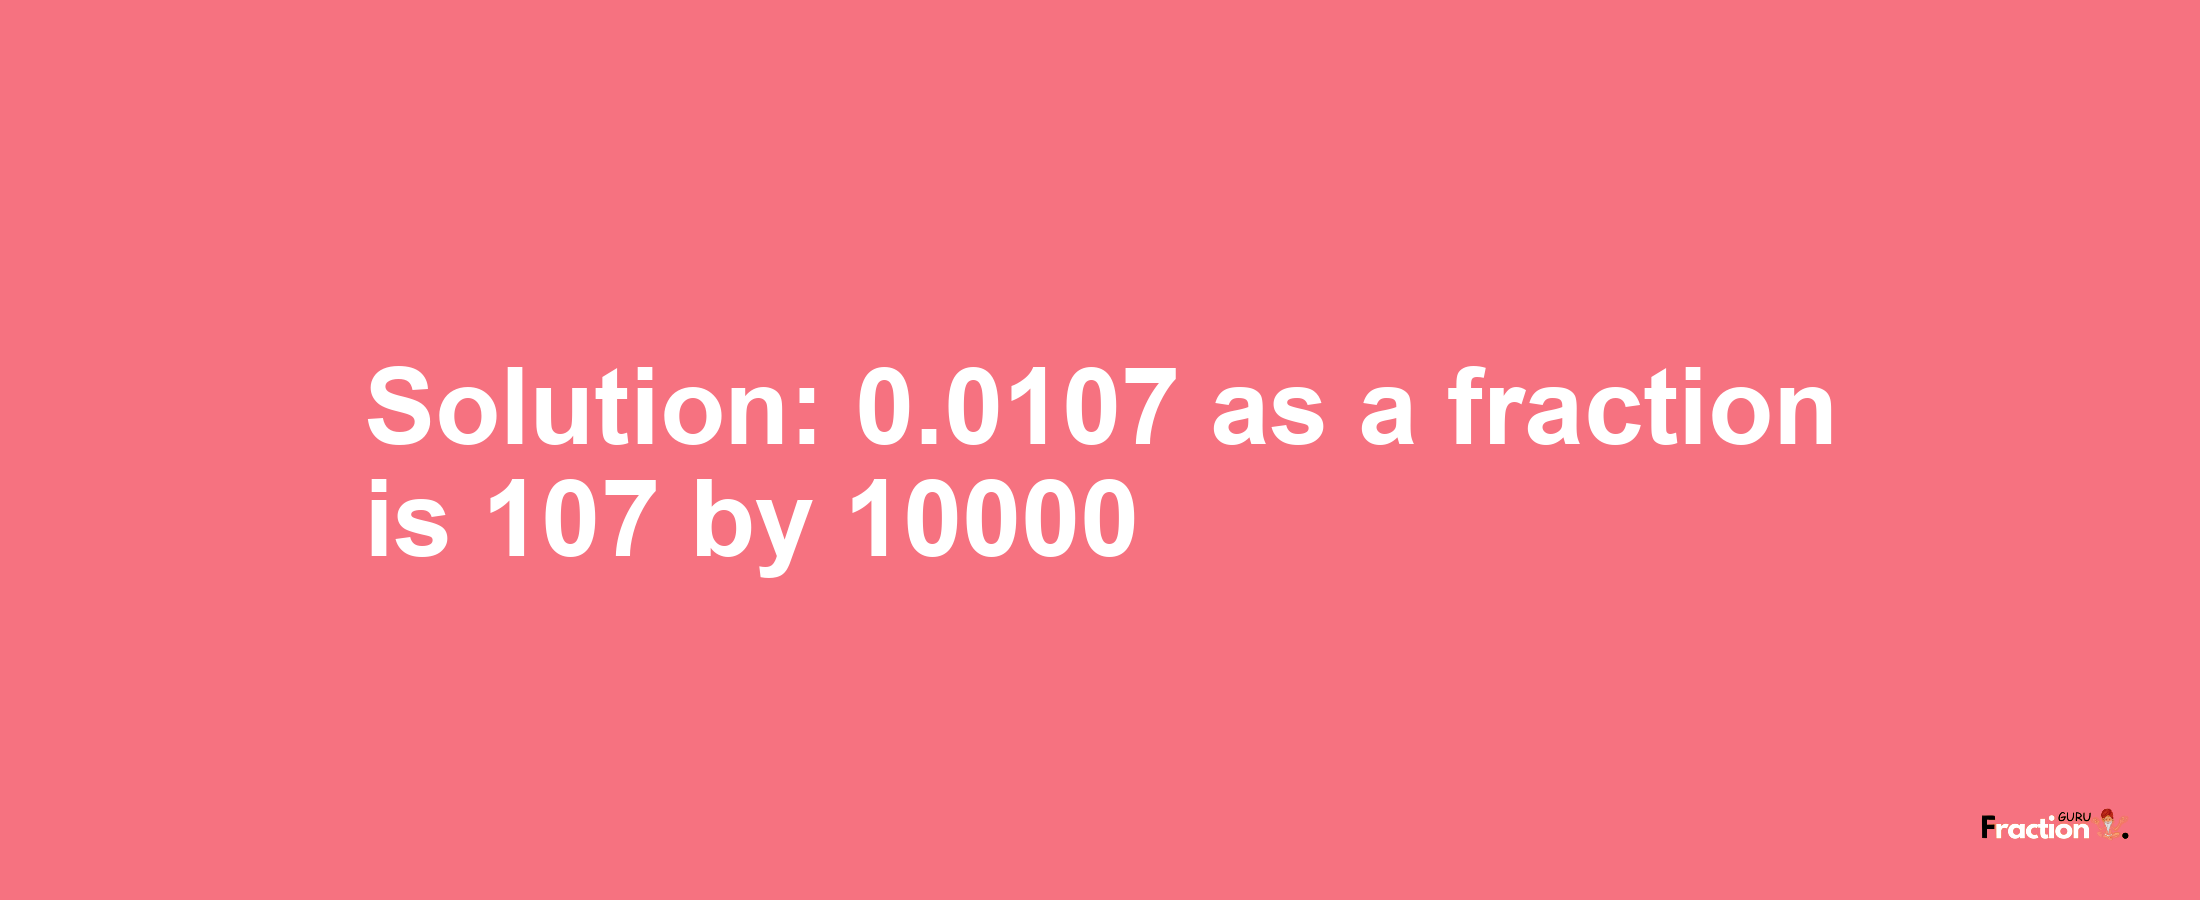 Solution:0.0107 as a fraction is 107/10000